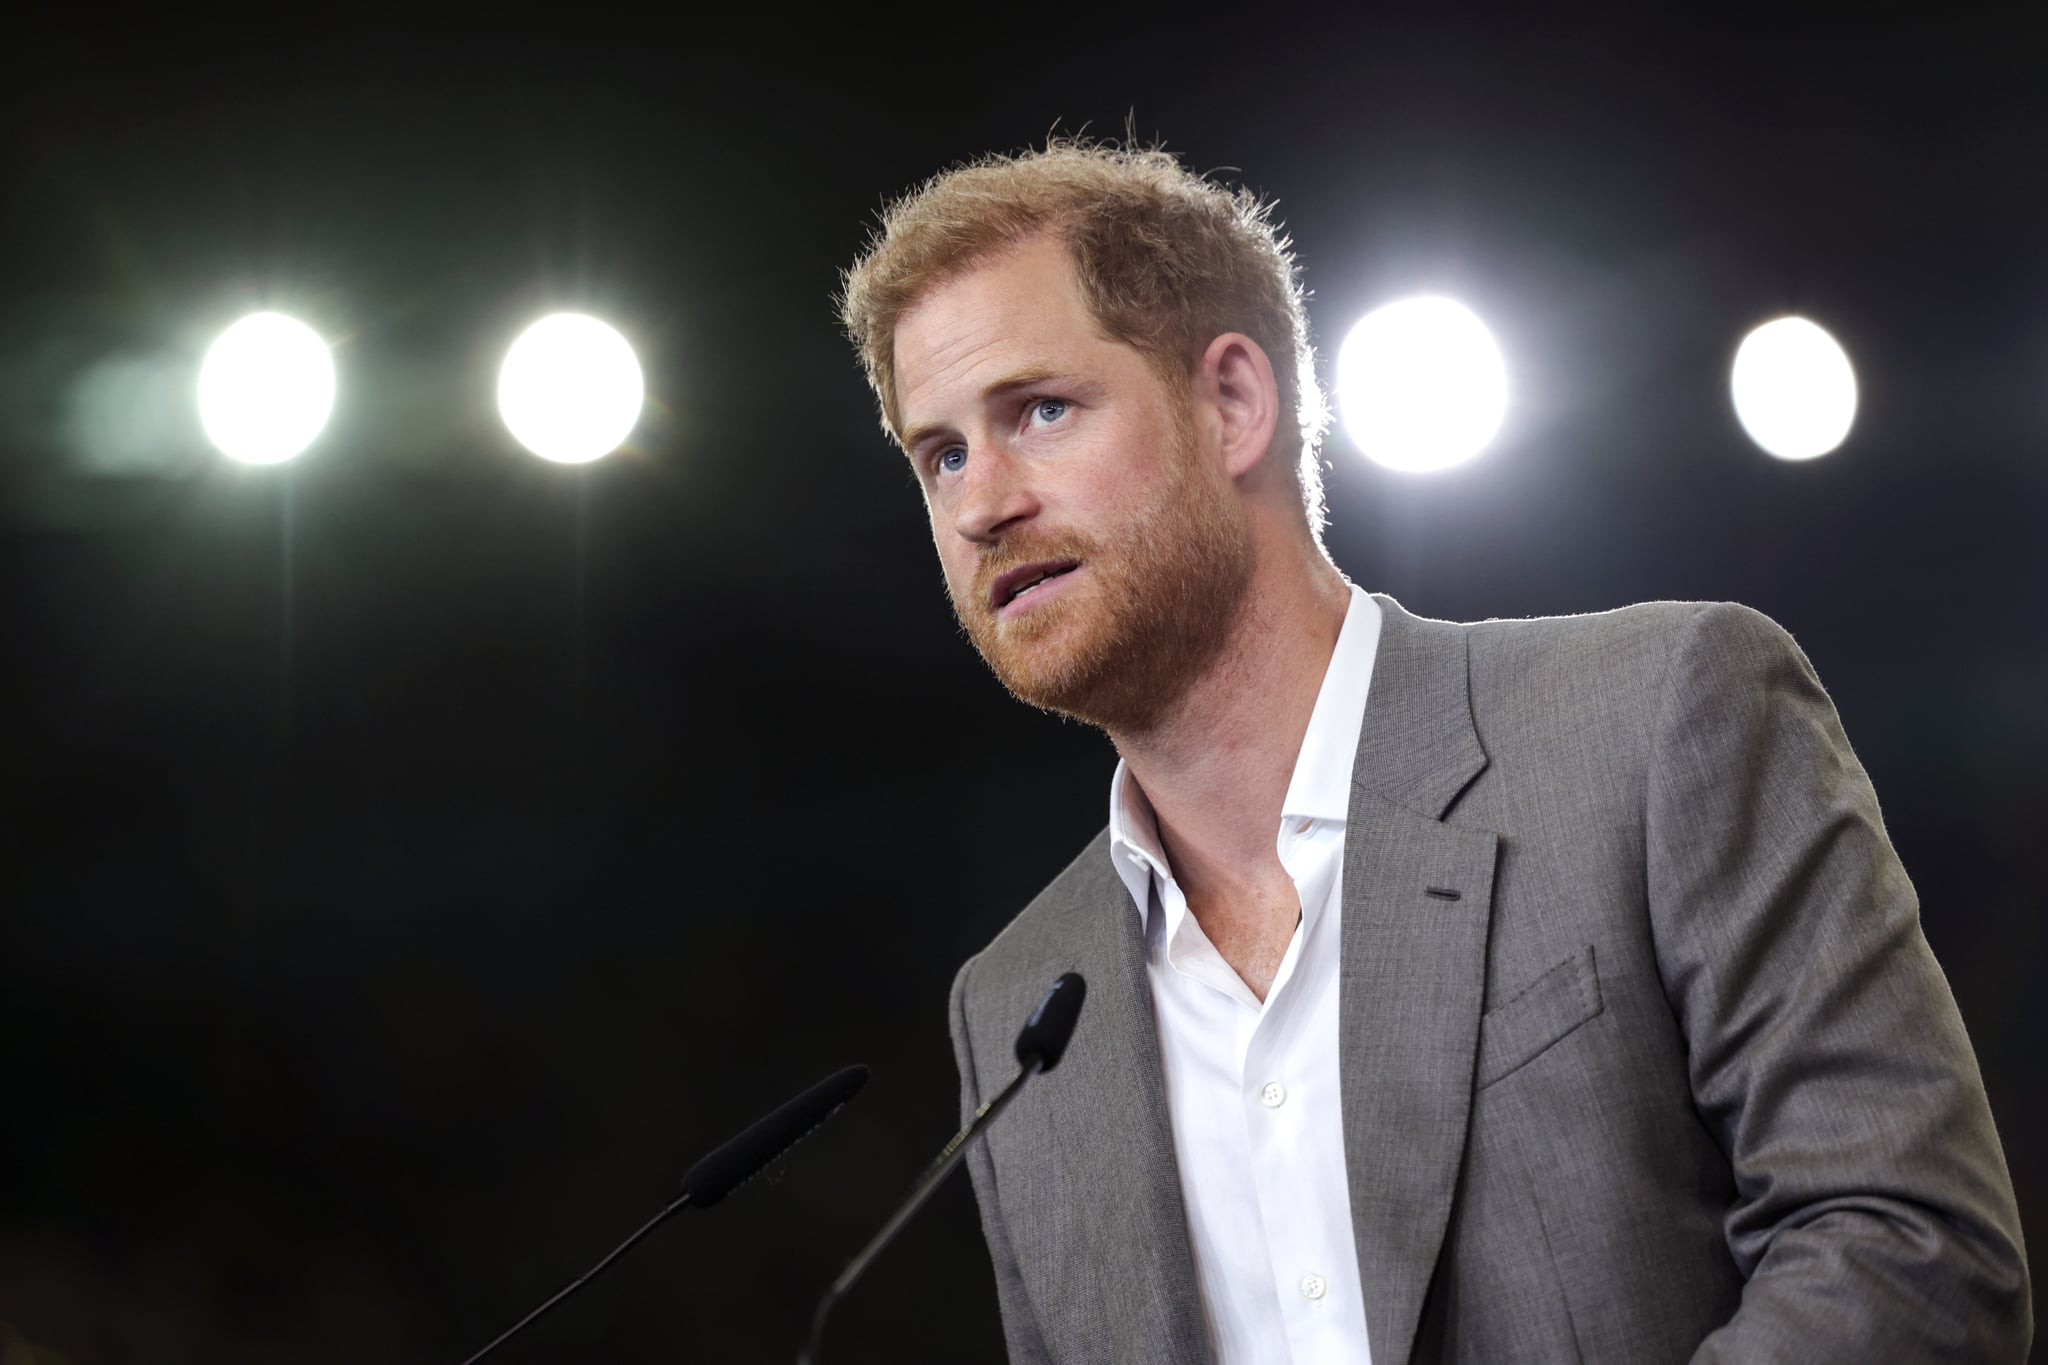 DUSSELDORF, GERMANY - SEPTEMBER 06: Prince Harry, Duke of Sussex speaks on stage during the press conference at the Invictus Games Dusseldorf 2023 - One Year To Go events, on September 06, 2022 in Dusseldorf, Germany. The Invictus Games is an international multi-sport event first held in 2014, for wounded, injured and sick servicemen and women, both serving and veterans. The Games were founded by Prince Harry, Duke of Sussex who's inspiration came from his visit to the Warrior Games in the United States, where he witnessed the ability of sport to help both psychologically and physically. (Photo by Chris Jackson/Getty Images for Invictus Games Dusseldorf 2023)